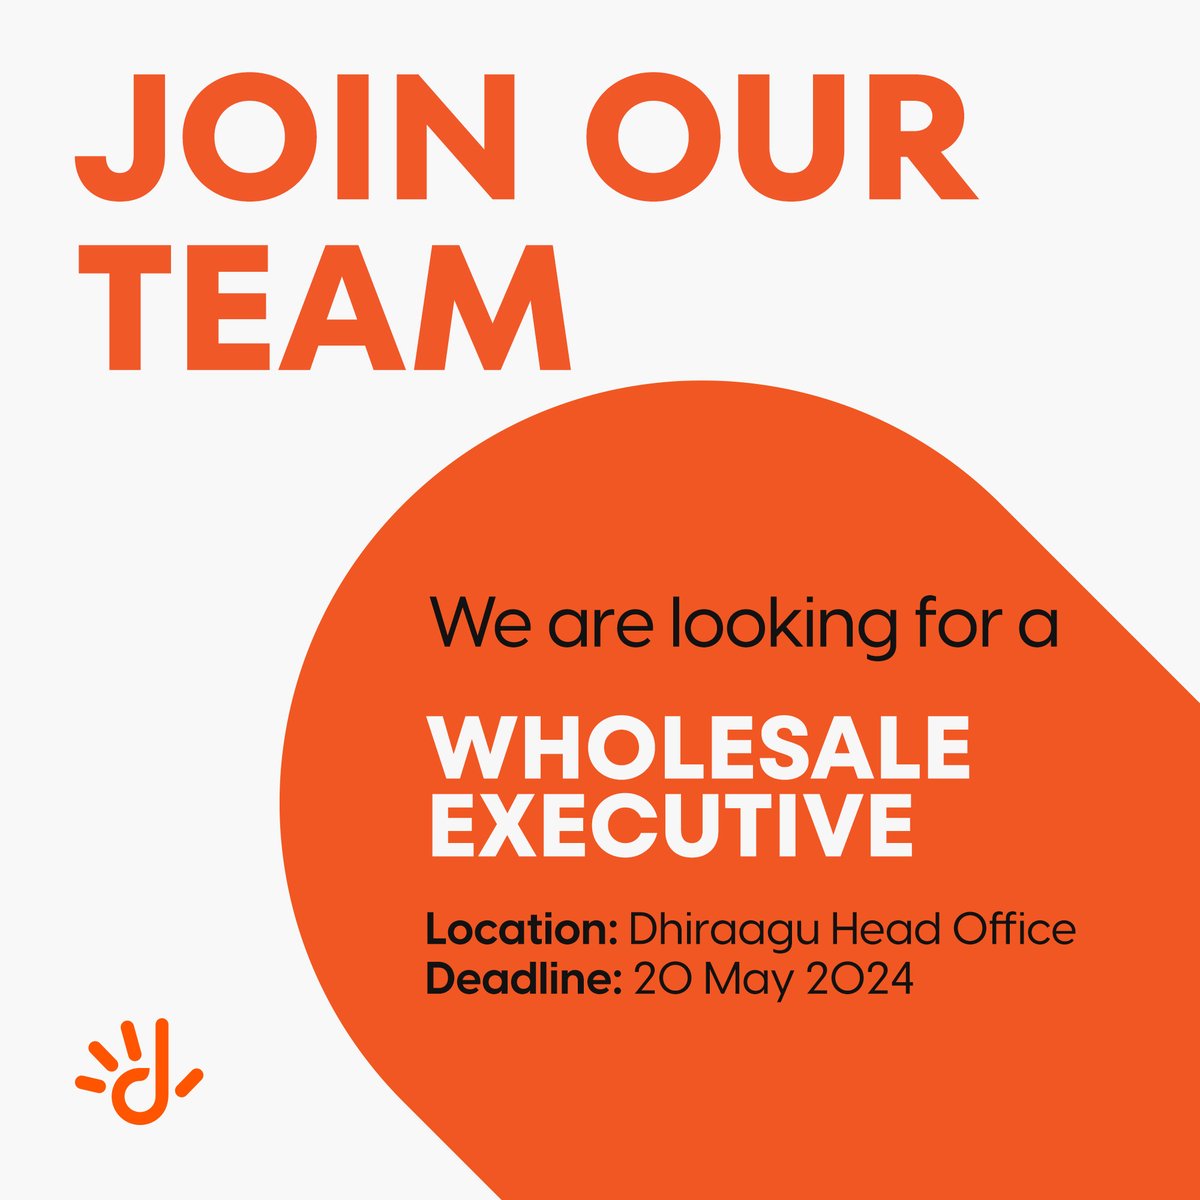 Join our team to shape the digital future! We are looking for a Wholesale Executive. To apply please visit - a.peoplehum.com/vedg9 Deadline – 20 May 2024.